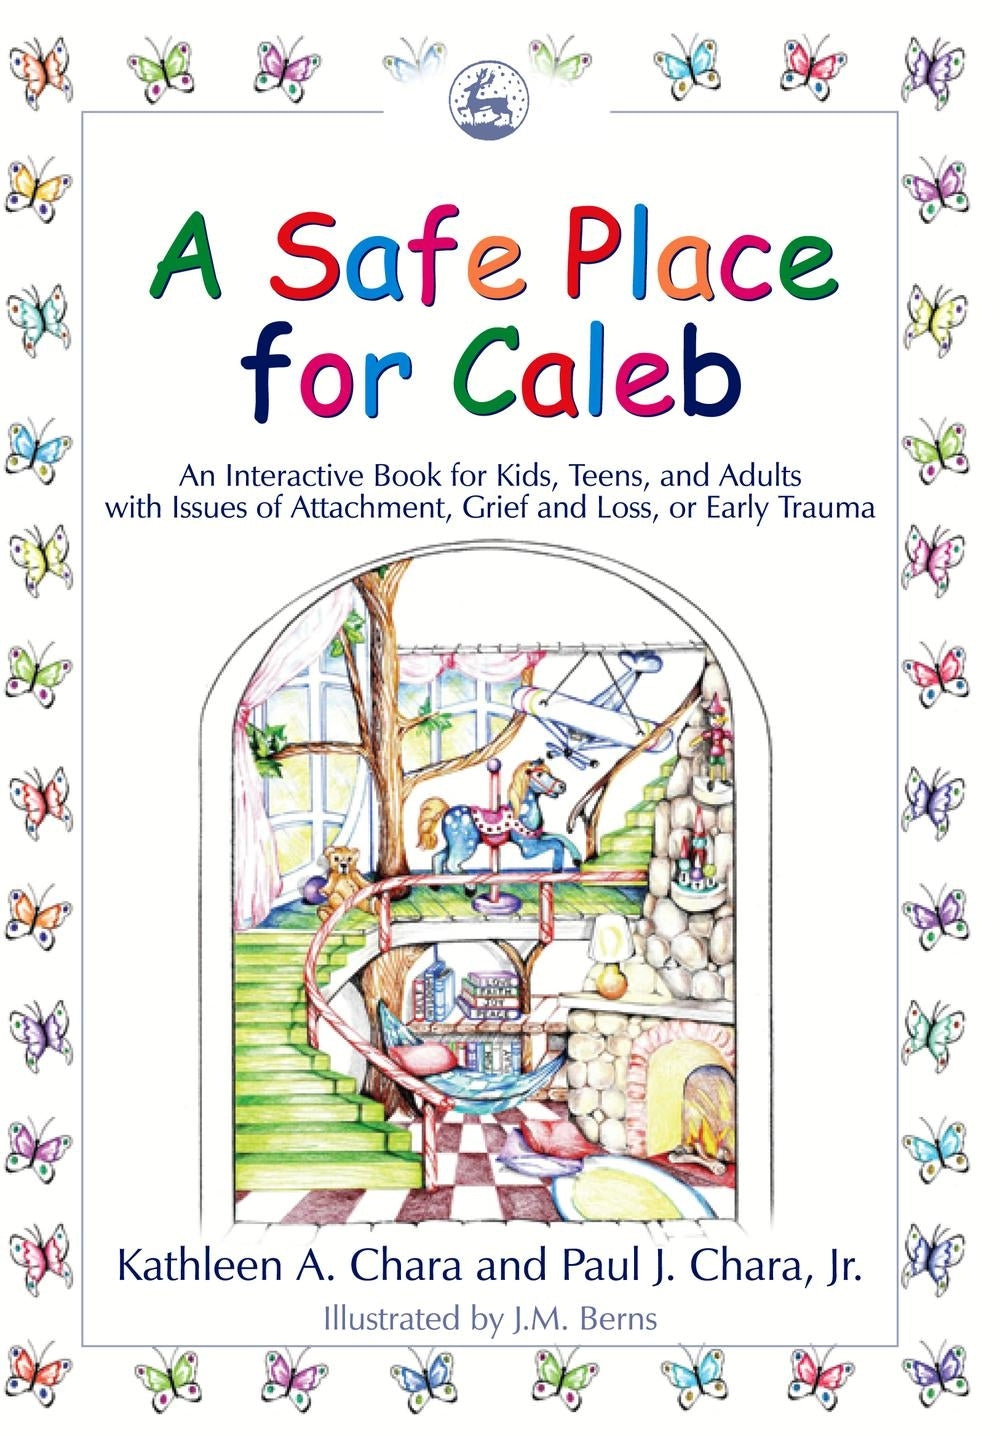 A Safe Place for Caleb by Jane M. Berns, Kathleen A. Chara, Paul J. Chara